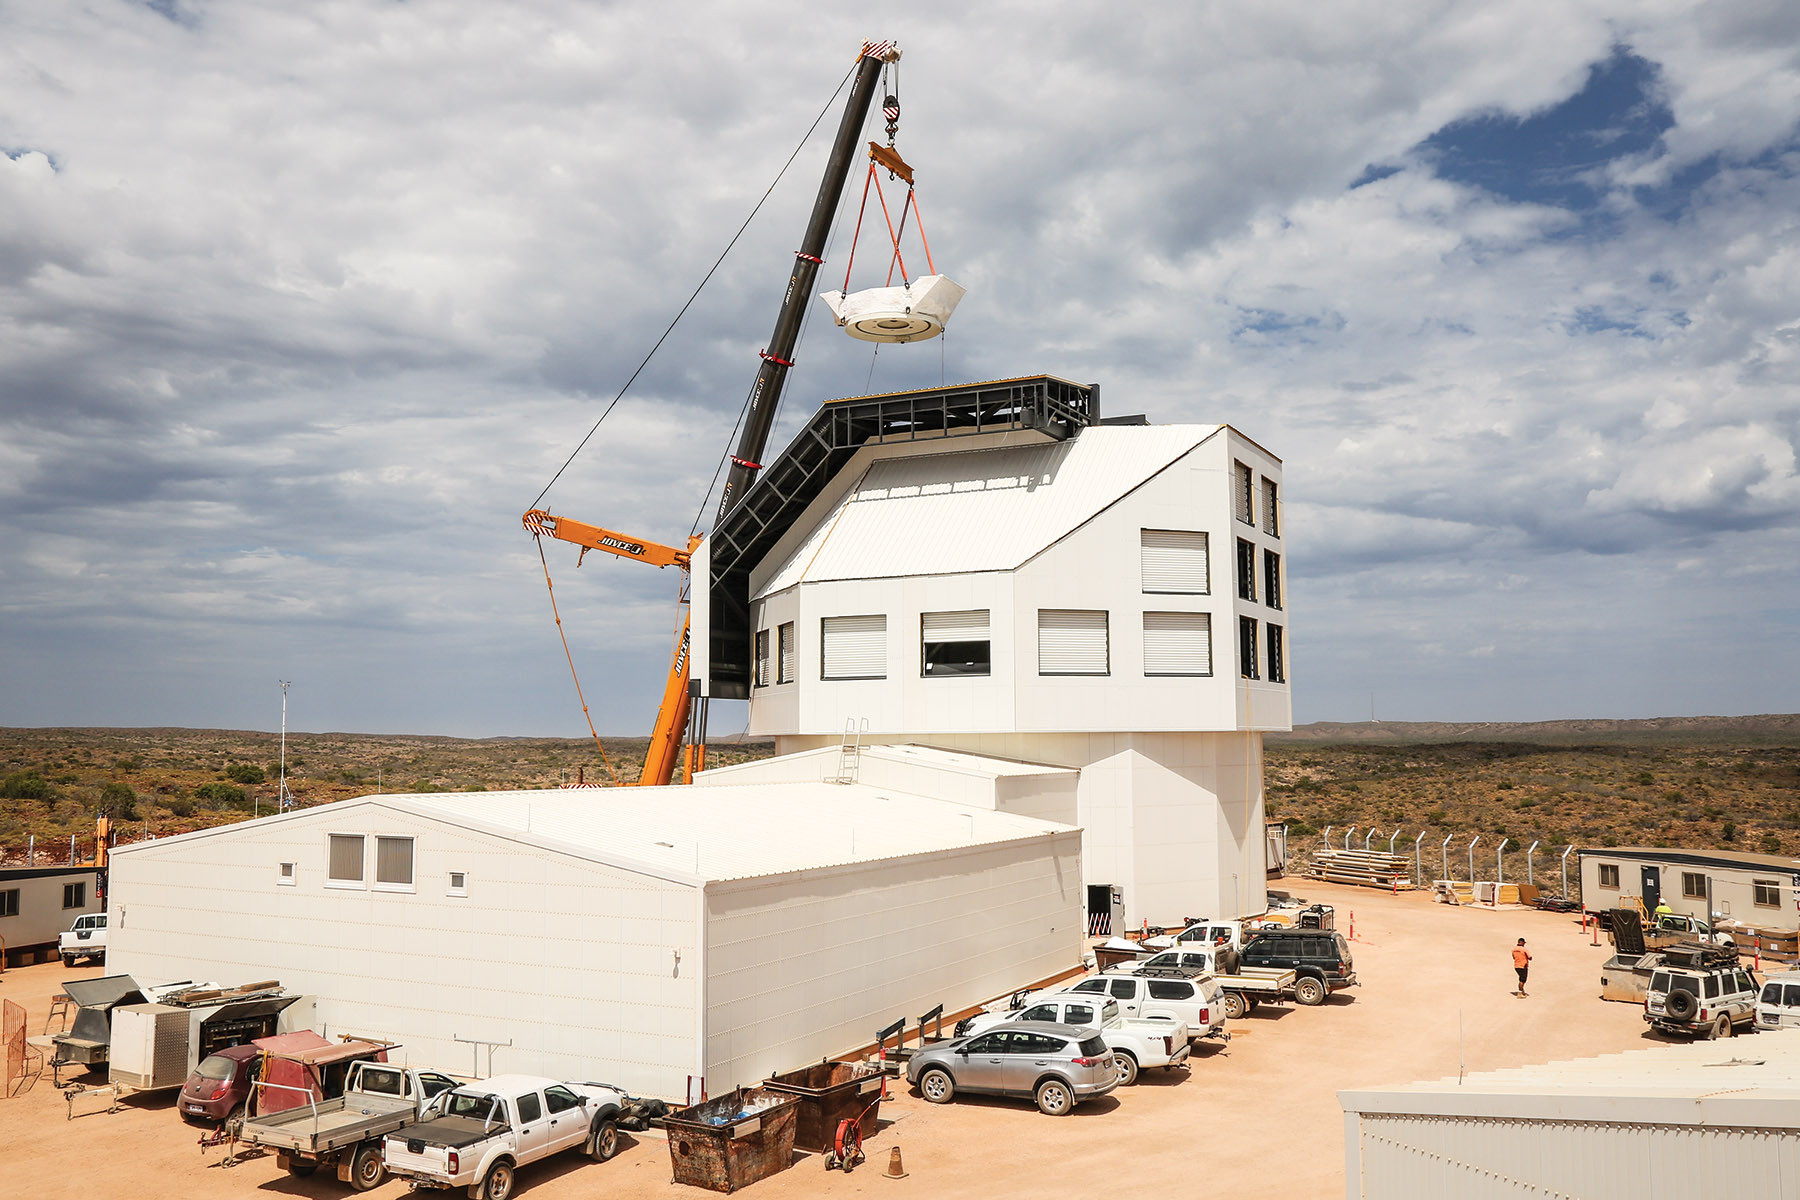 The photograph shows the new facility under construction to house the Space Surveillance Telescope in Western Australia. 